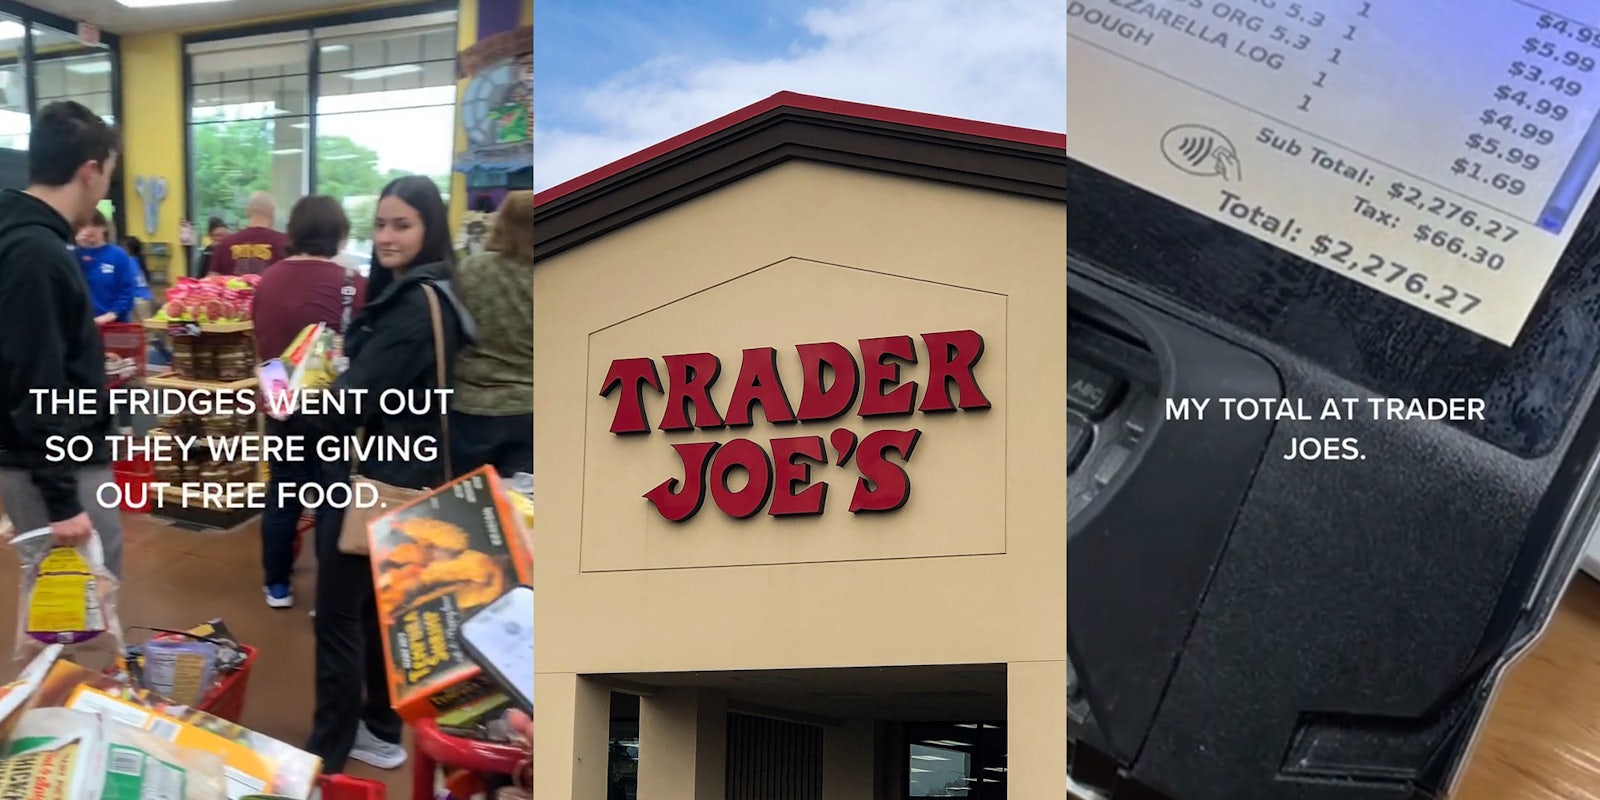 Trader Joe's customers with full carts in line with caption 'THE FRIDGES WENT OUT SO THEY WERE GIVING OUT FREE FOOD.' (l) Trader Joe's building with sign and blue sky (c) Trader Joe's check out with total on screen at $2,276.27 with caption 'MY TOTAL AT TRADER JOES' (r)